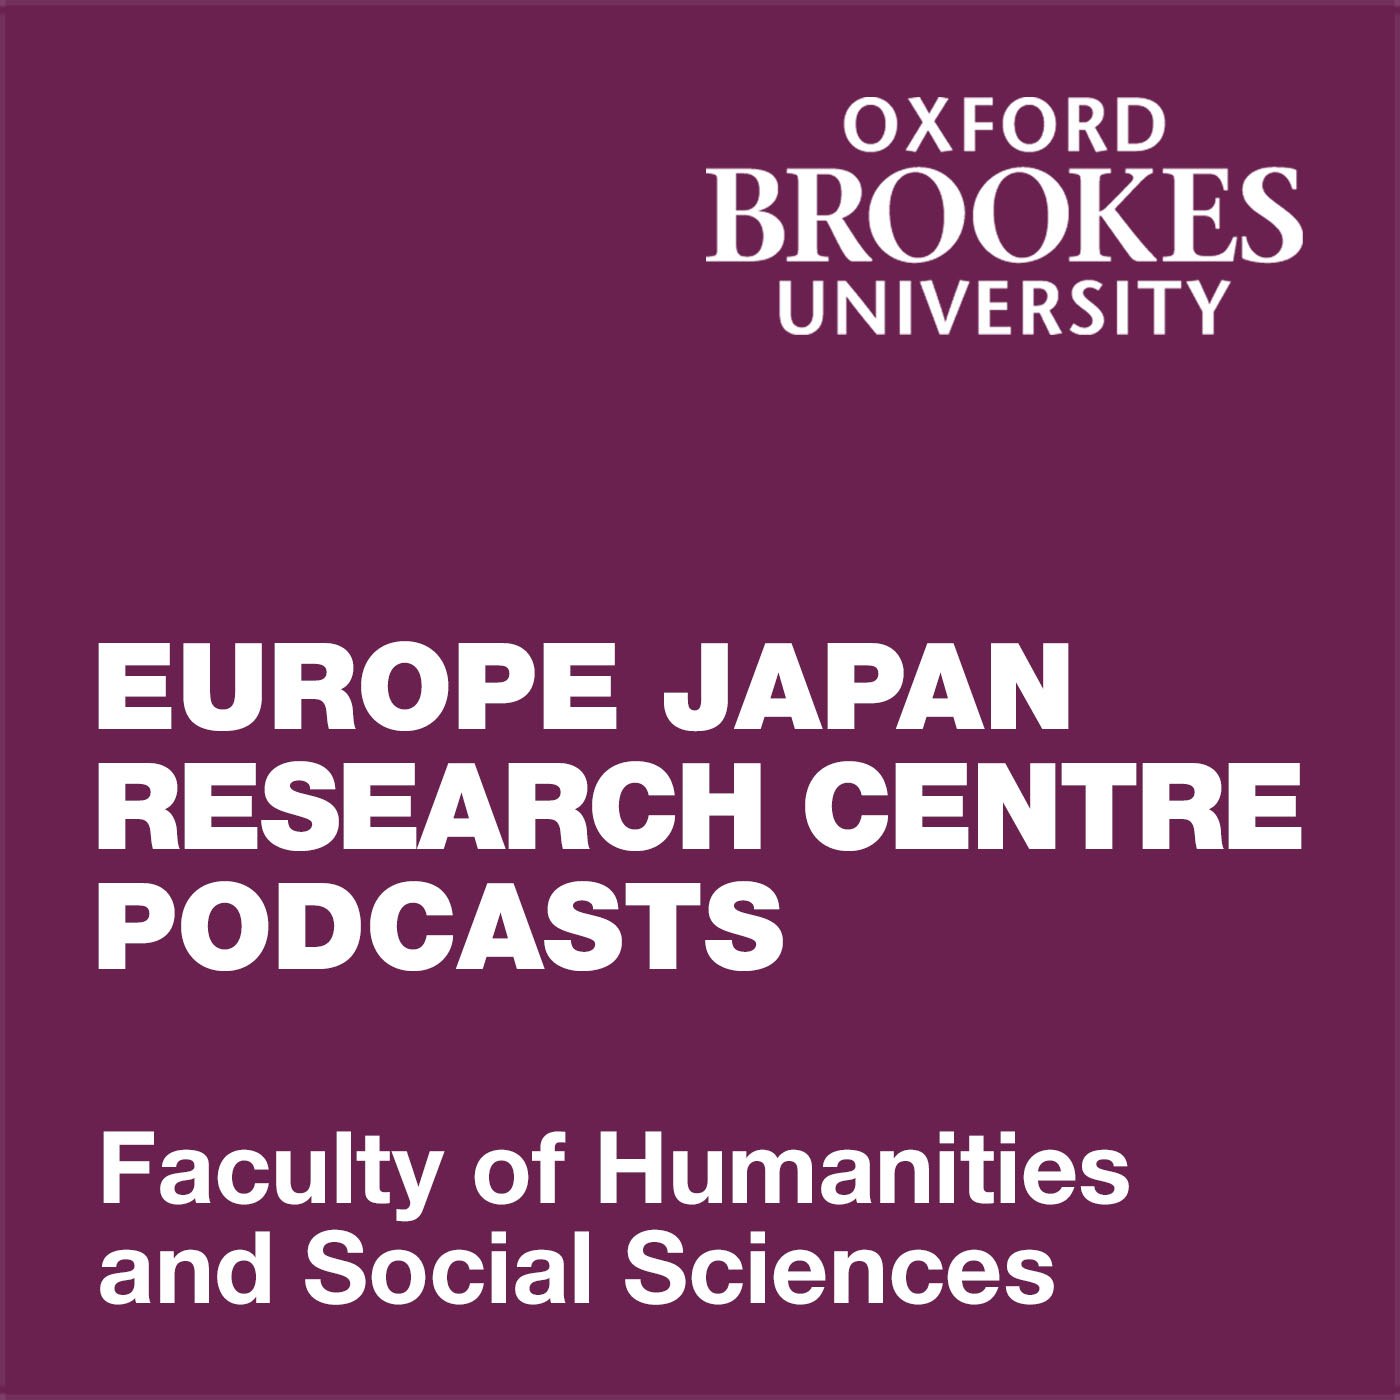 Europe Japan Research Centre Podcasts